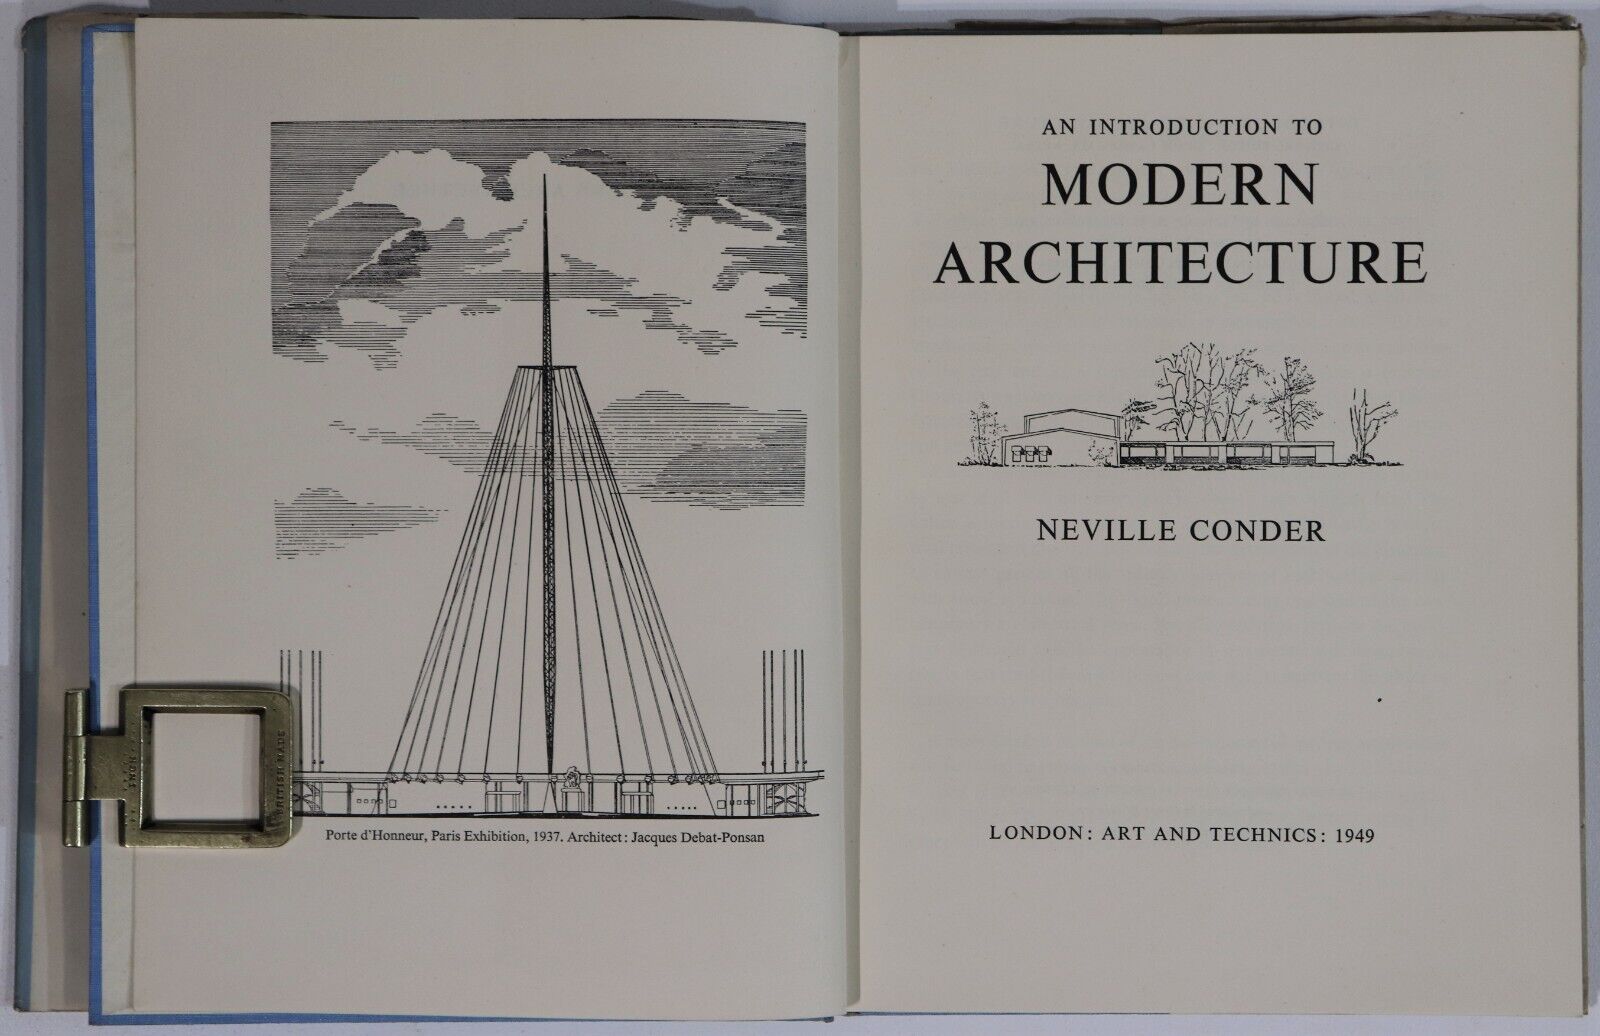 An Introduction To Modern Architecture by N. Conder - 1949 - Antique Book